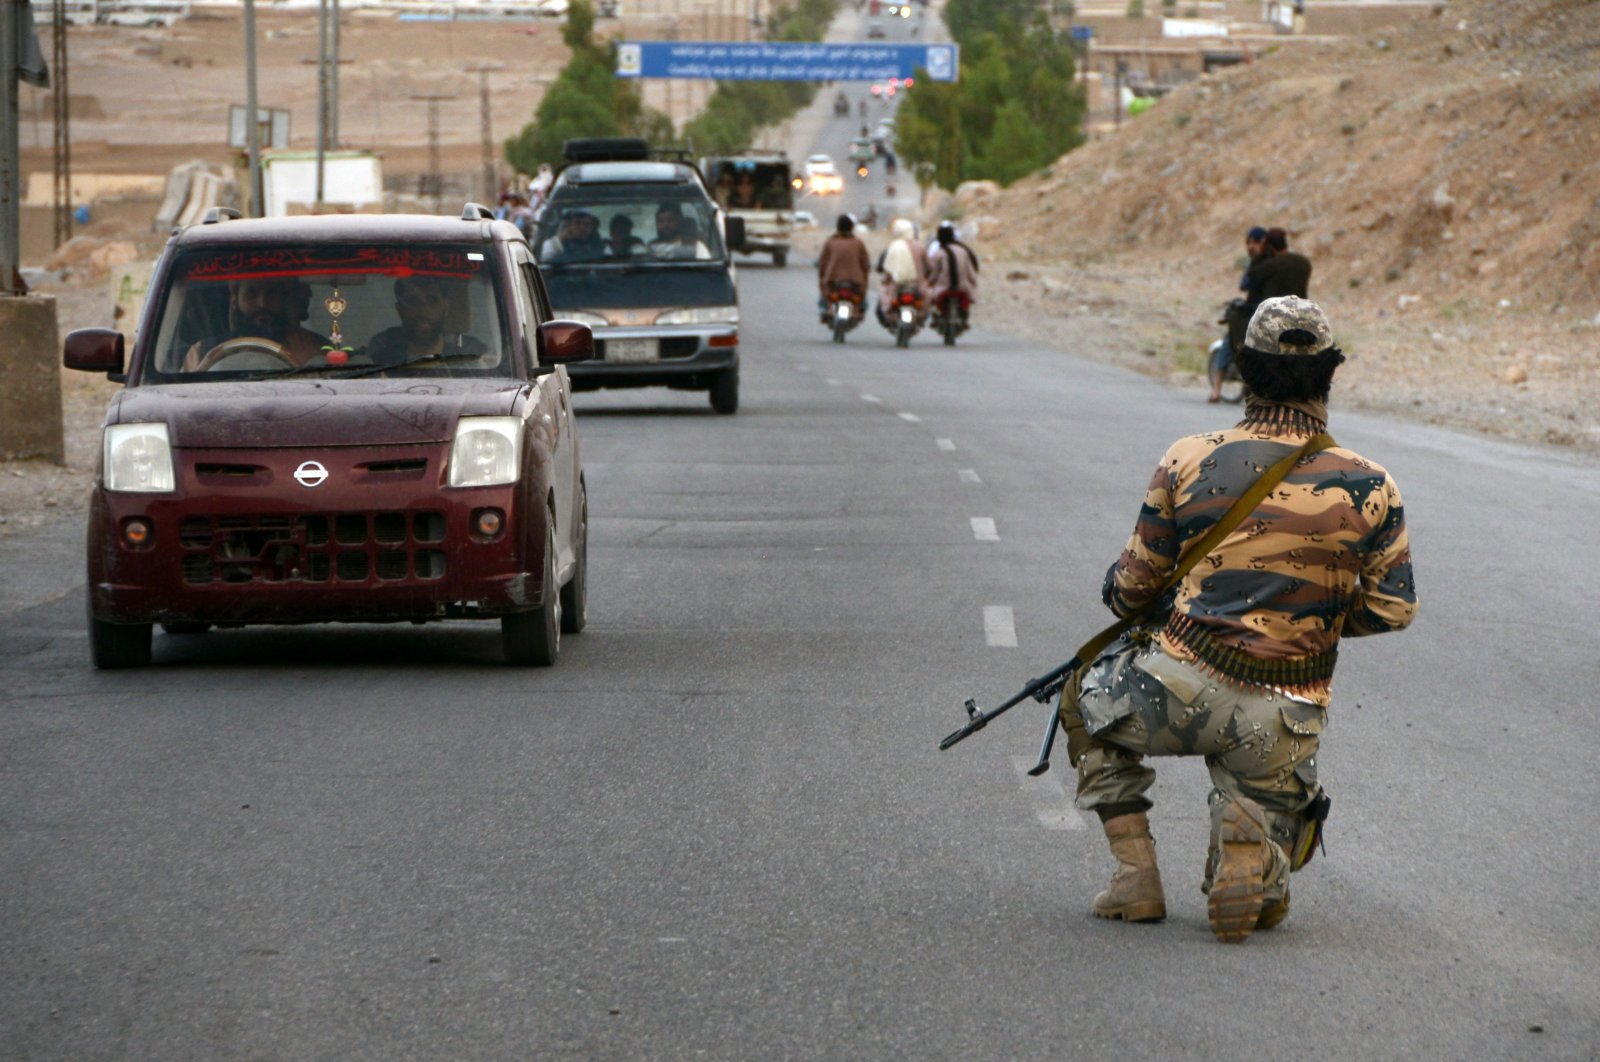 A Taliban fighter kneels down while on guard at a road checkpoint in Kandahar, Afghanistan, April 23, 2022. (AFP)